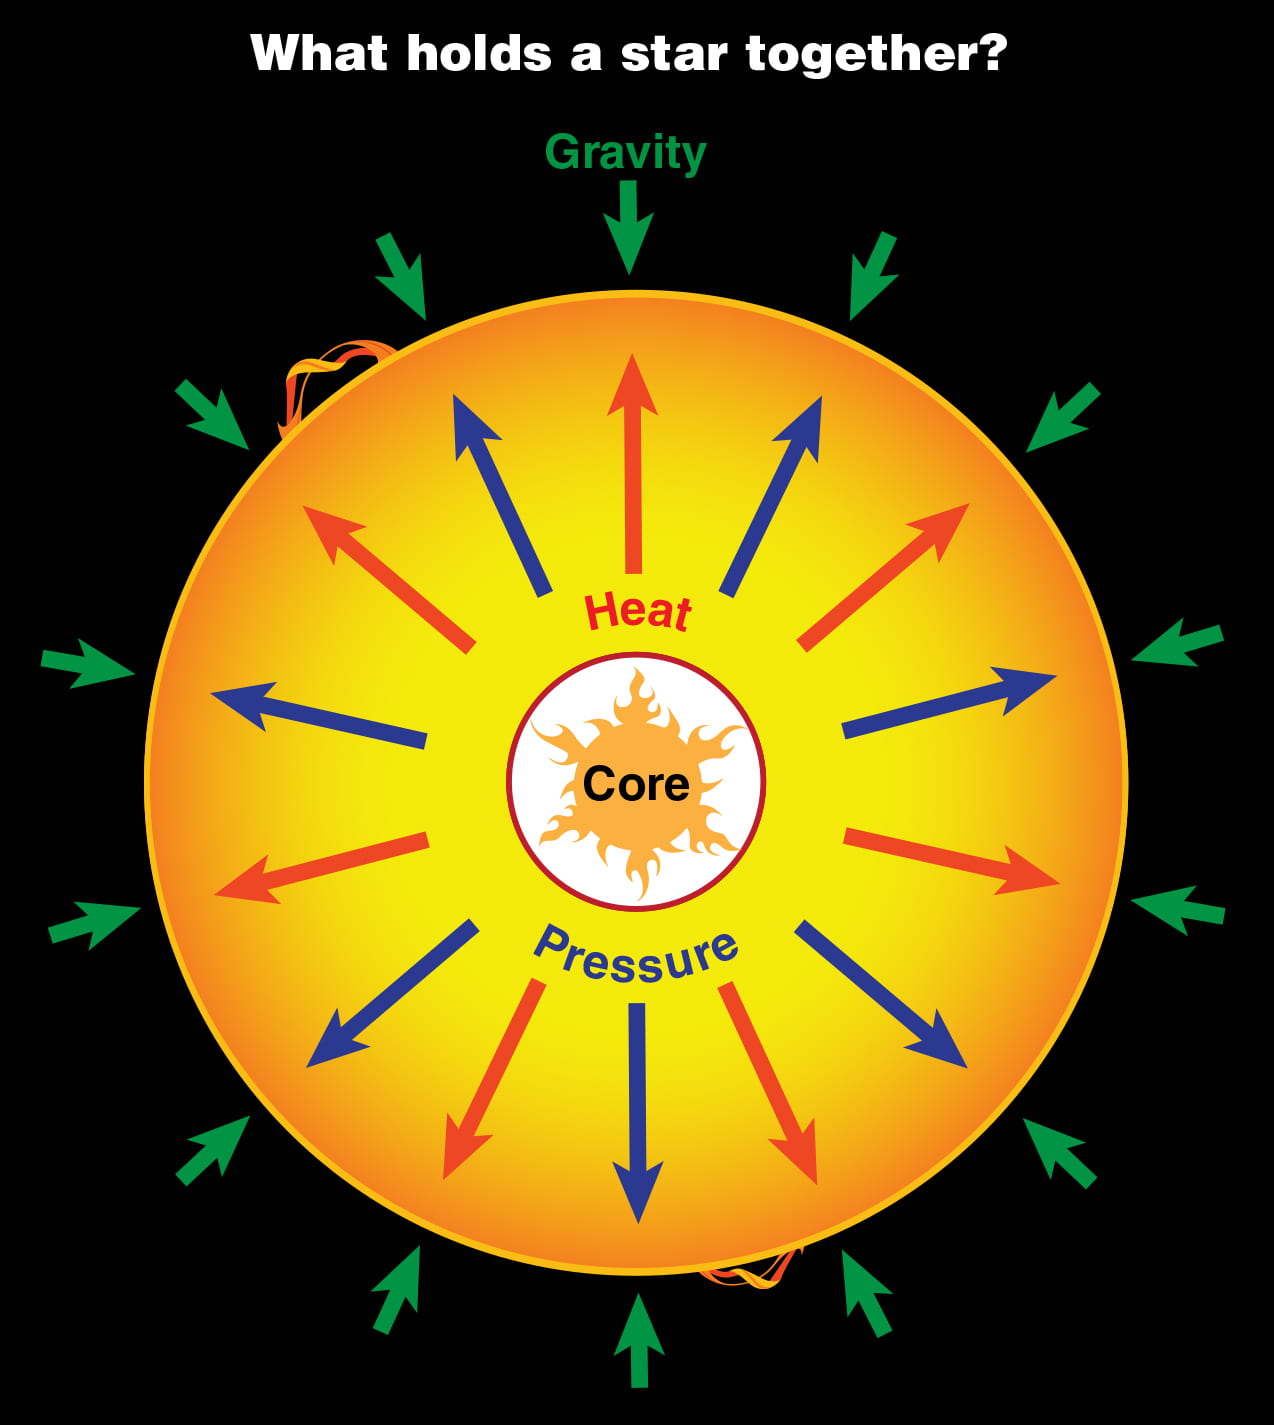 A diagram of the interior of a star is seen with arrows radiating out from the center labelled “pressure” and arrows pointing inward against the outside of the star labelled “gravity.”